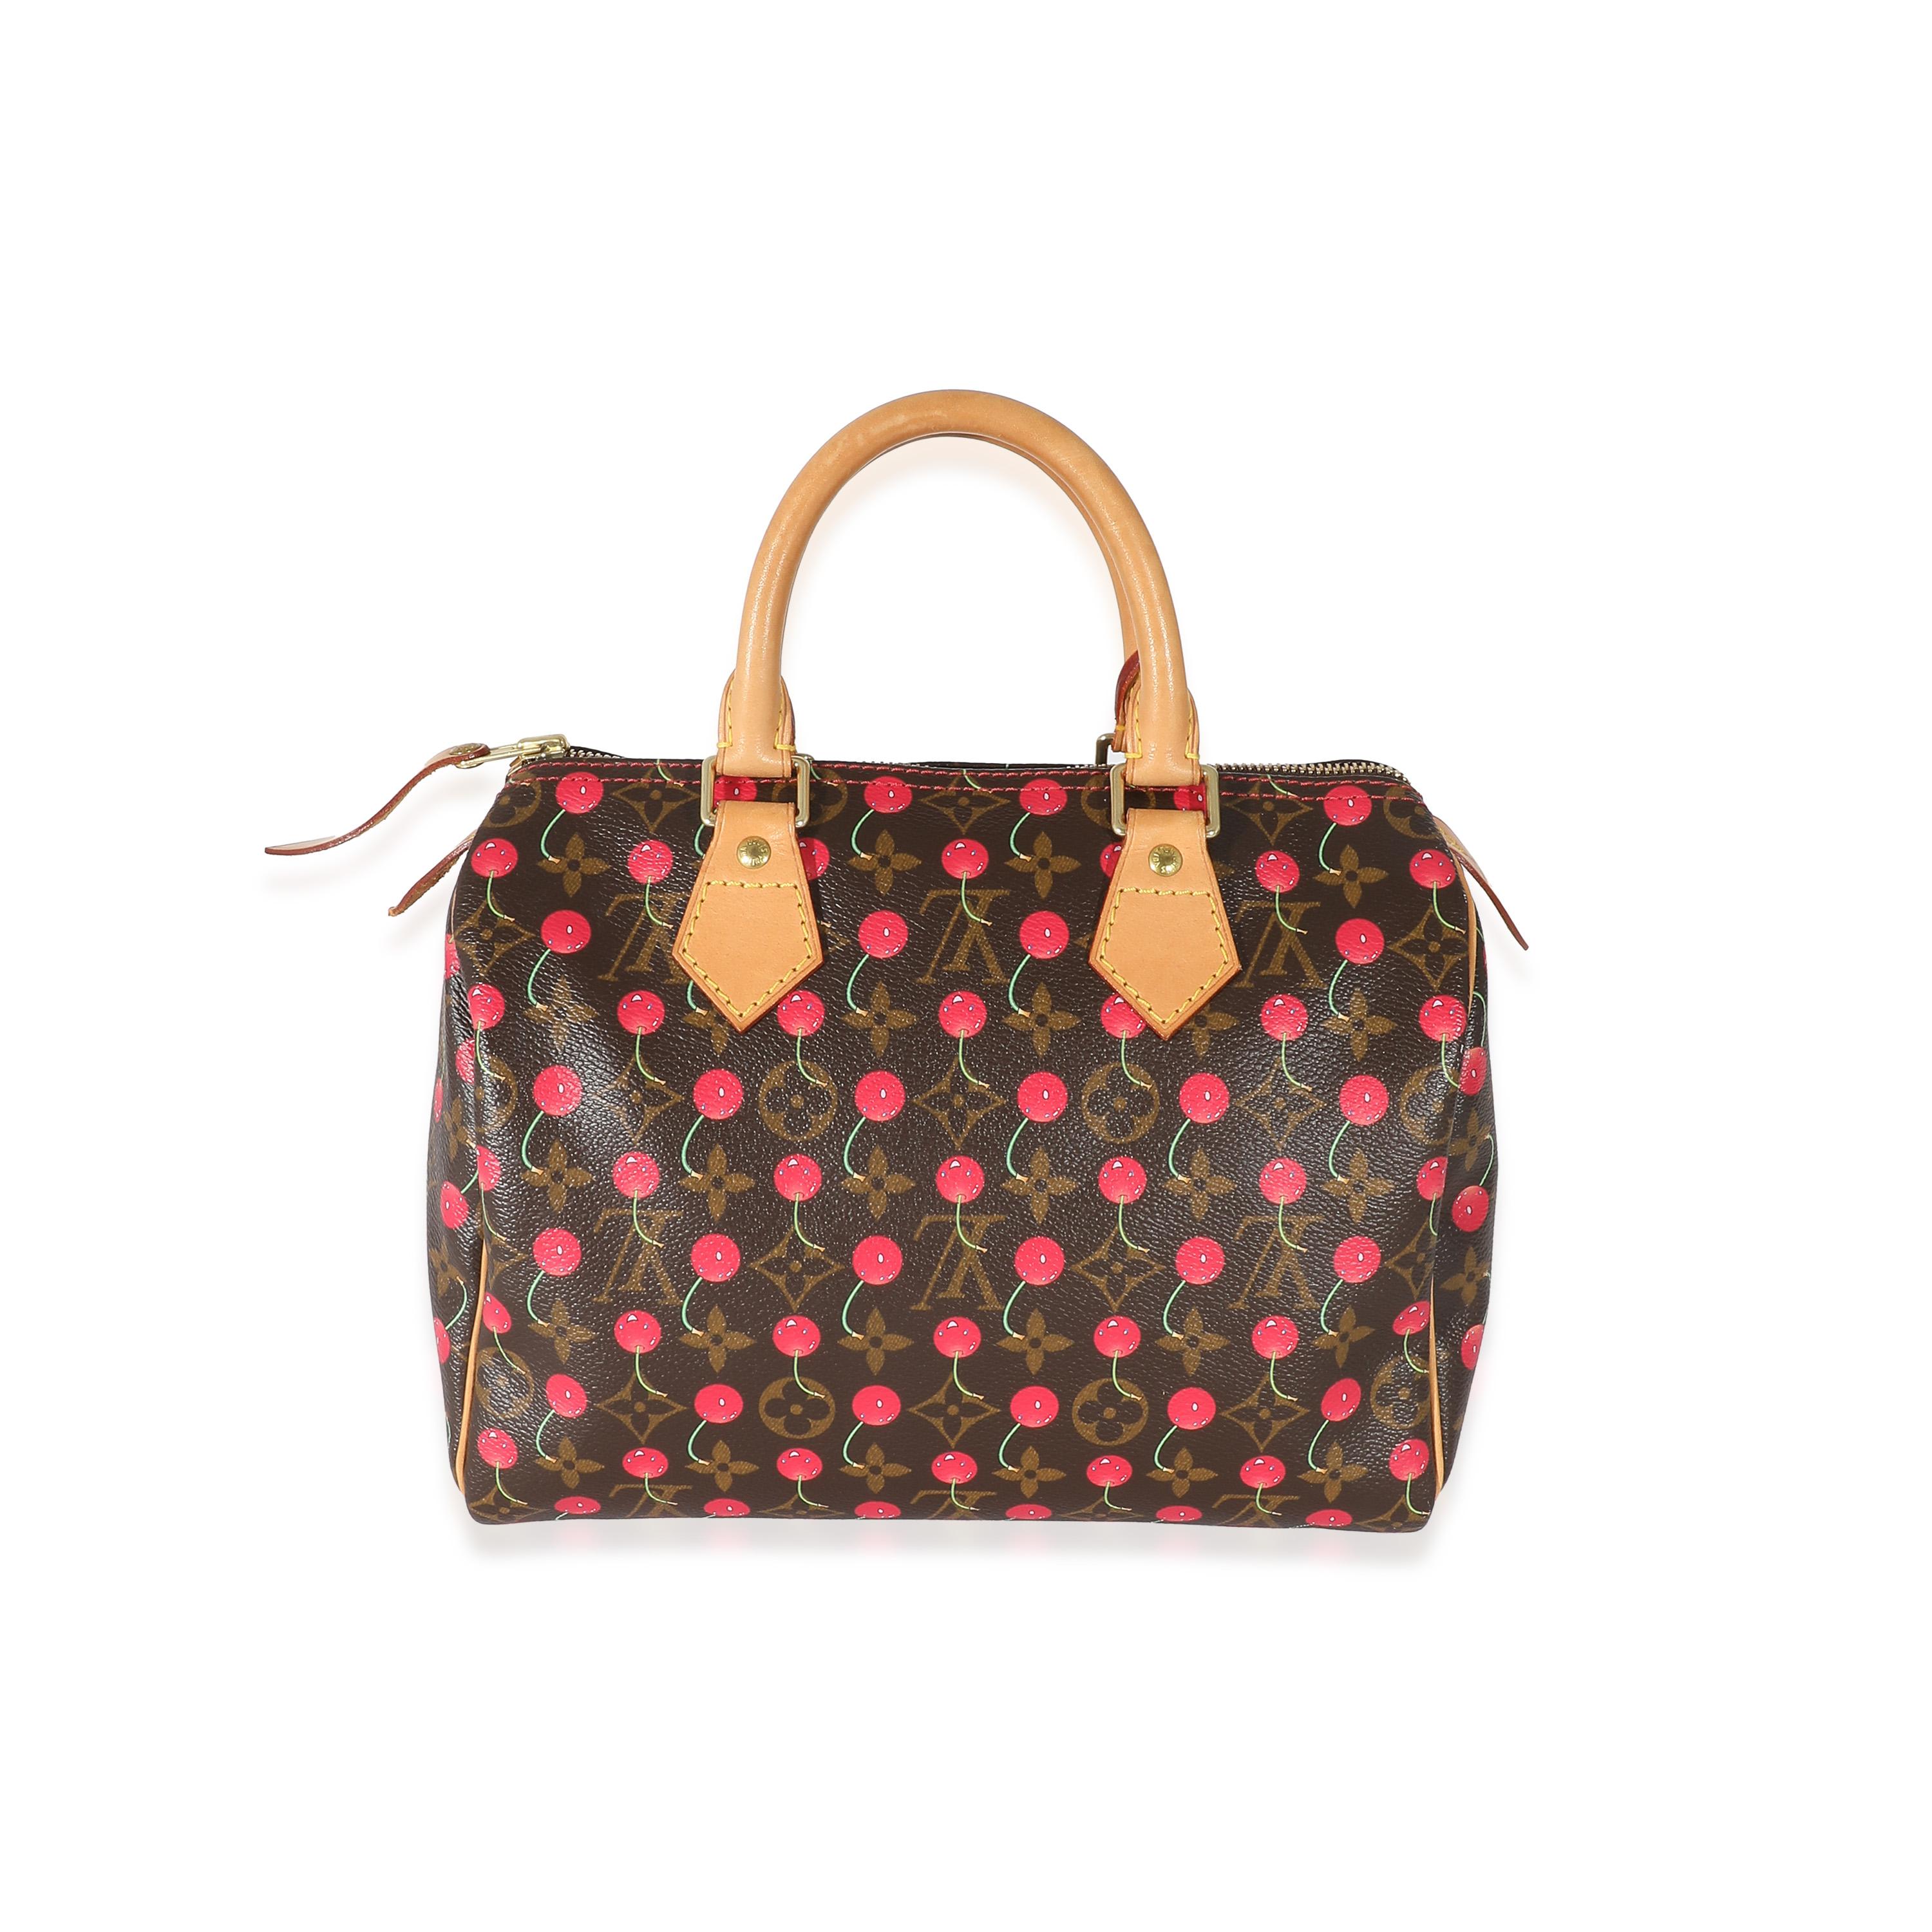 Listing Title: Louis Vuitton Monogram Canvas Cerise Speedy 25
SKU: 134165
Condition: Pre-owned 
Condition Description: Originally called the 'Express' bag, Louis Vuitton's Speedy bag is a style that has been around since 1930. The barrel-shaped bag